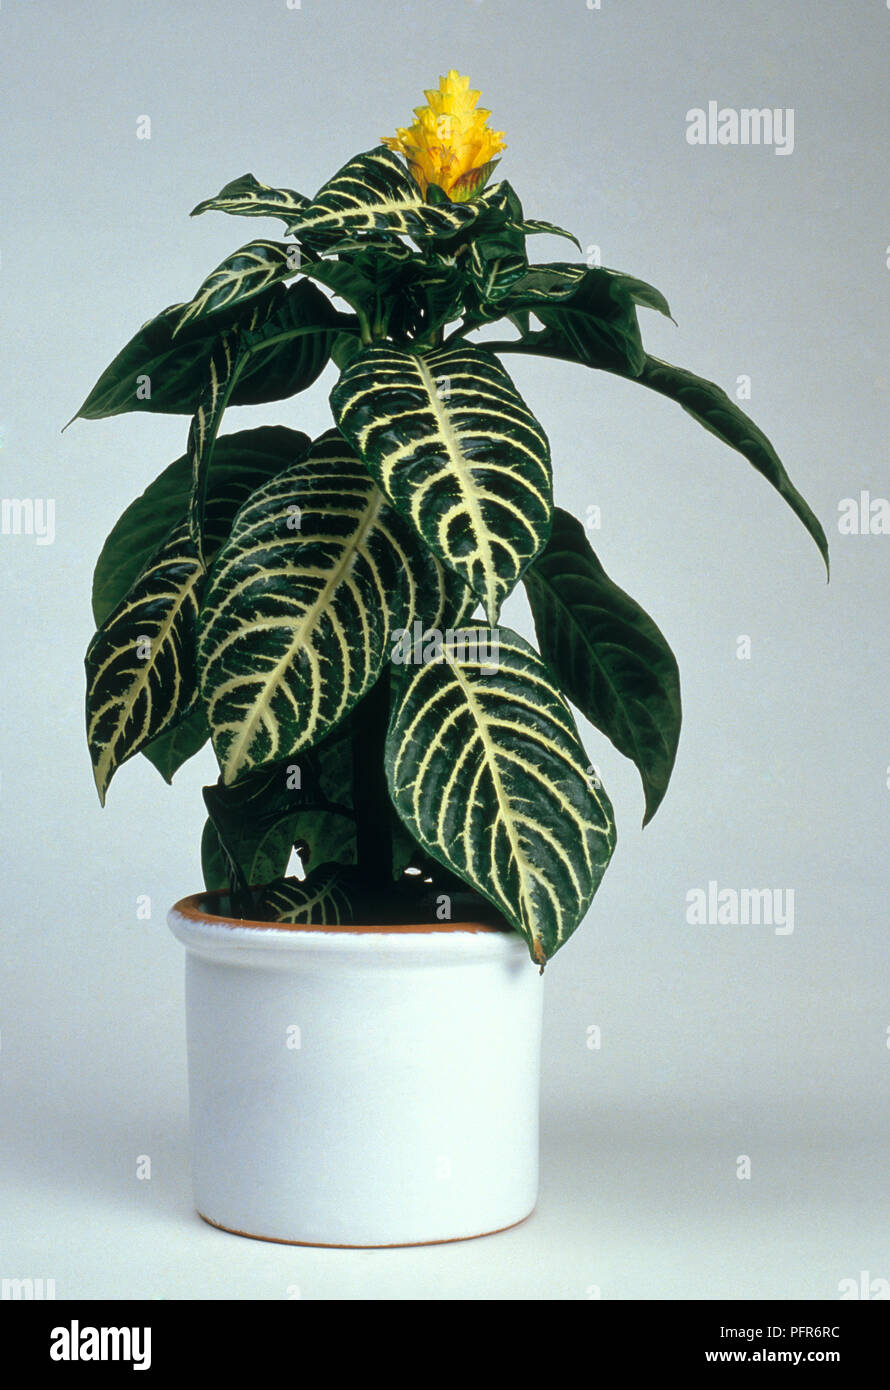 Aphelandra squarrosa (Saffron spike, Zebra plant) in flowerpot, showing striped leaves and yellow flower at top Stock Photo